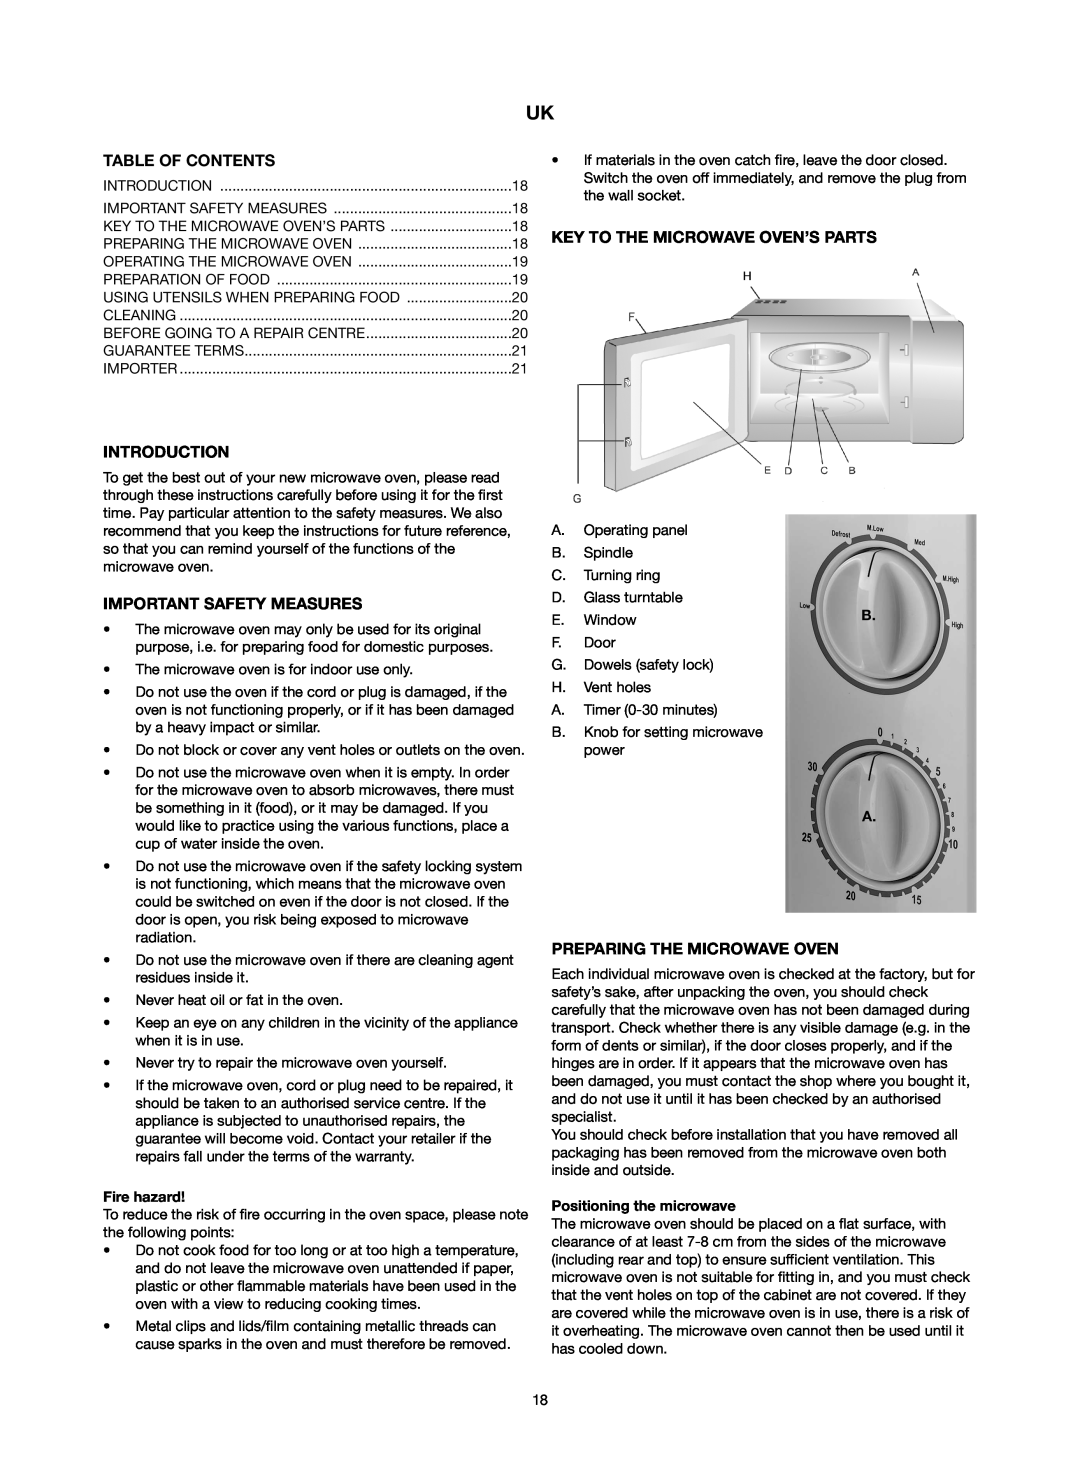 Melissa 753-097 Table Of Contents, Introduction, Important Safety Measures, Key To The Microwave Oven’S Parts, Fire hazard 